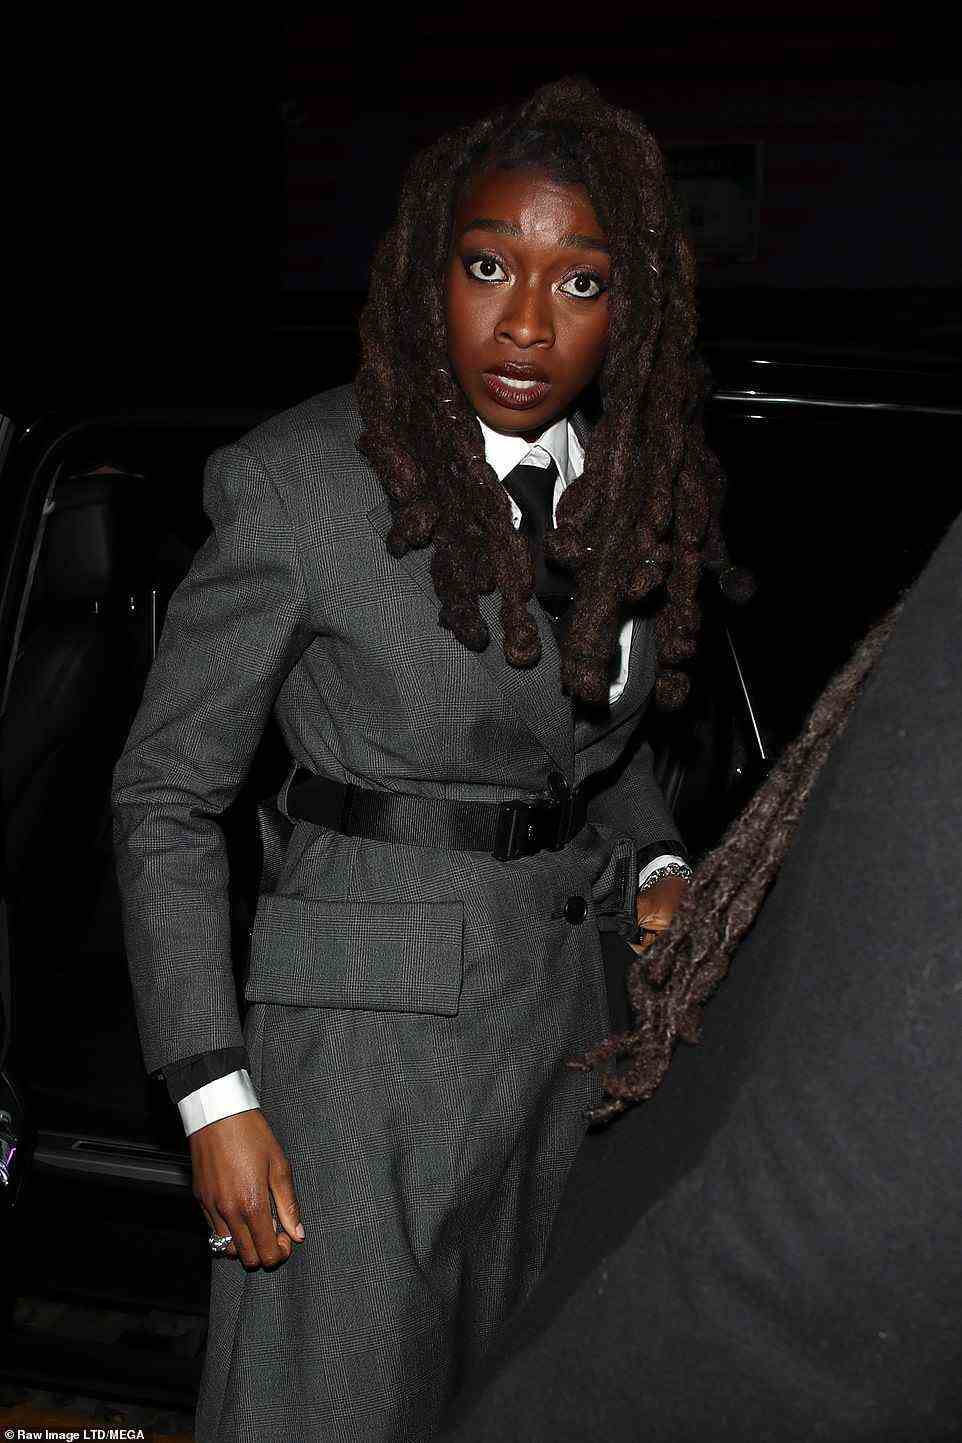 All partied out: Little Simz seemed in great spirits as she headed on to one of the afterparties